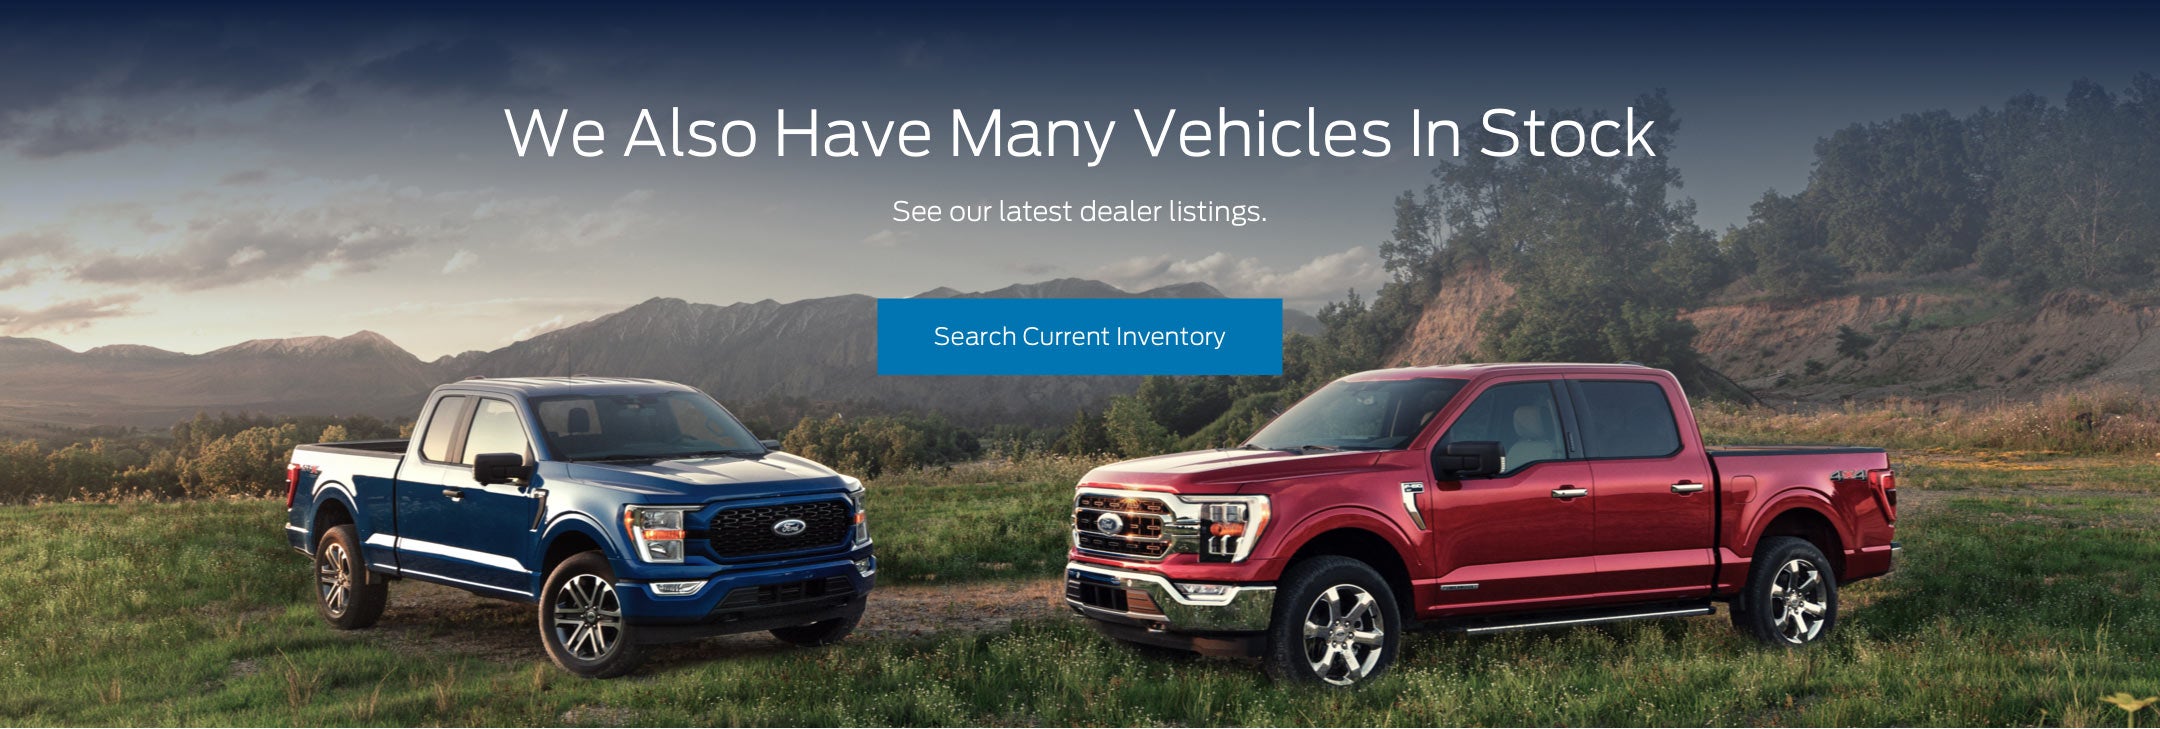 Ford vehicles in stock | Rush Truck Centers – Las Vegas in North Las Vegas NV